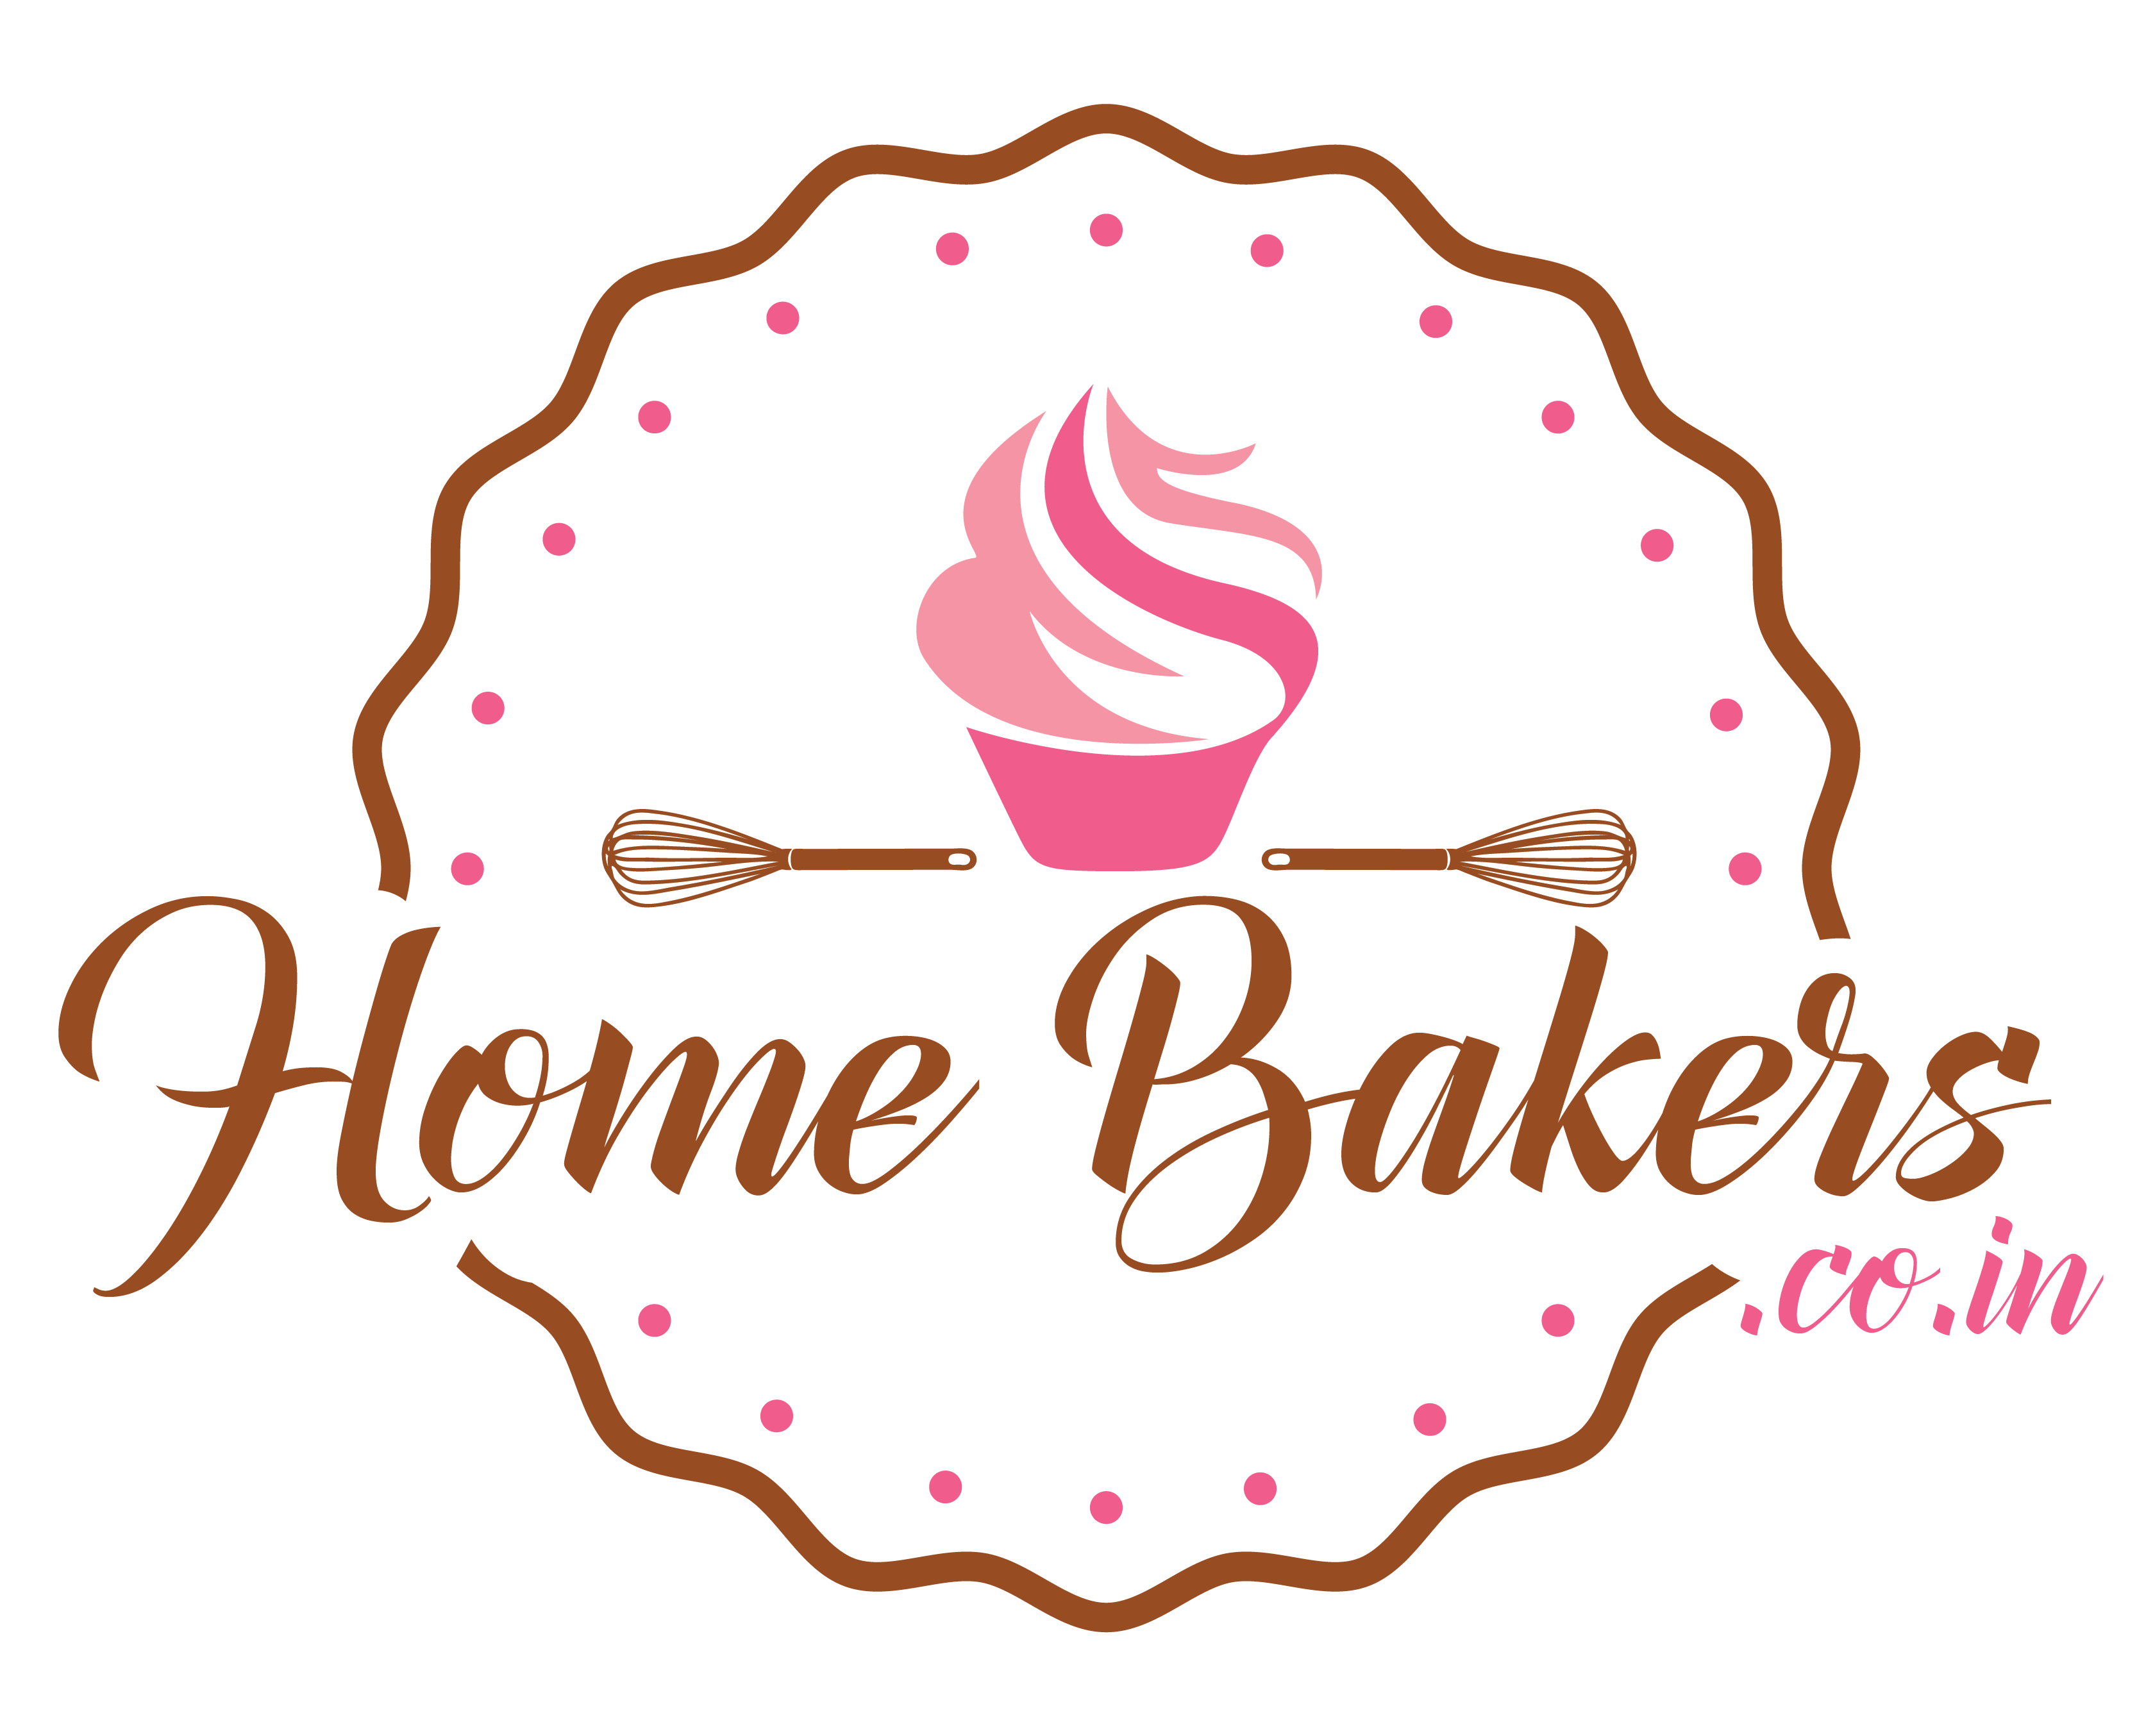 Being A Baker But Not Selling Your Cakes: My Business Model